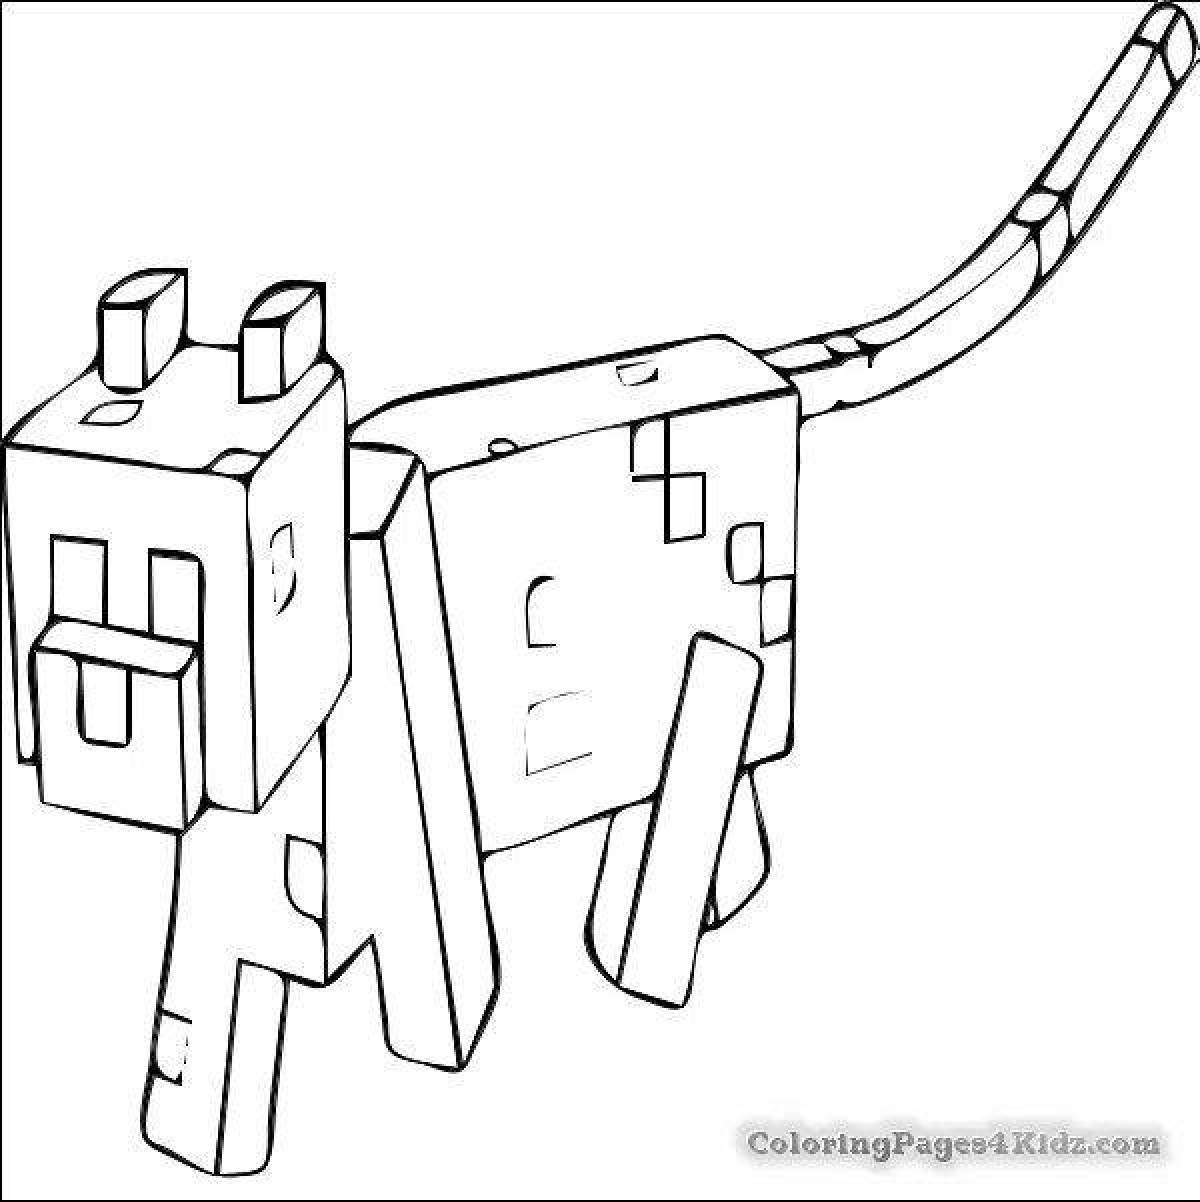 Fabulous ocelot minecraft coloring page